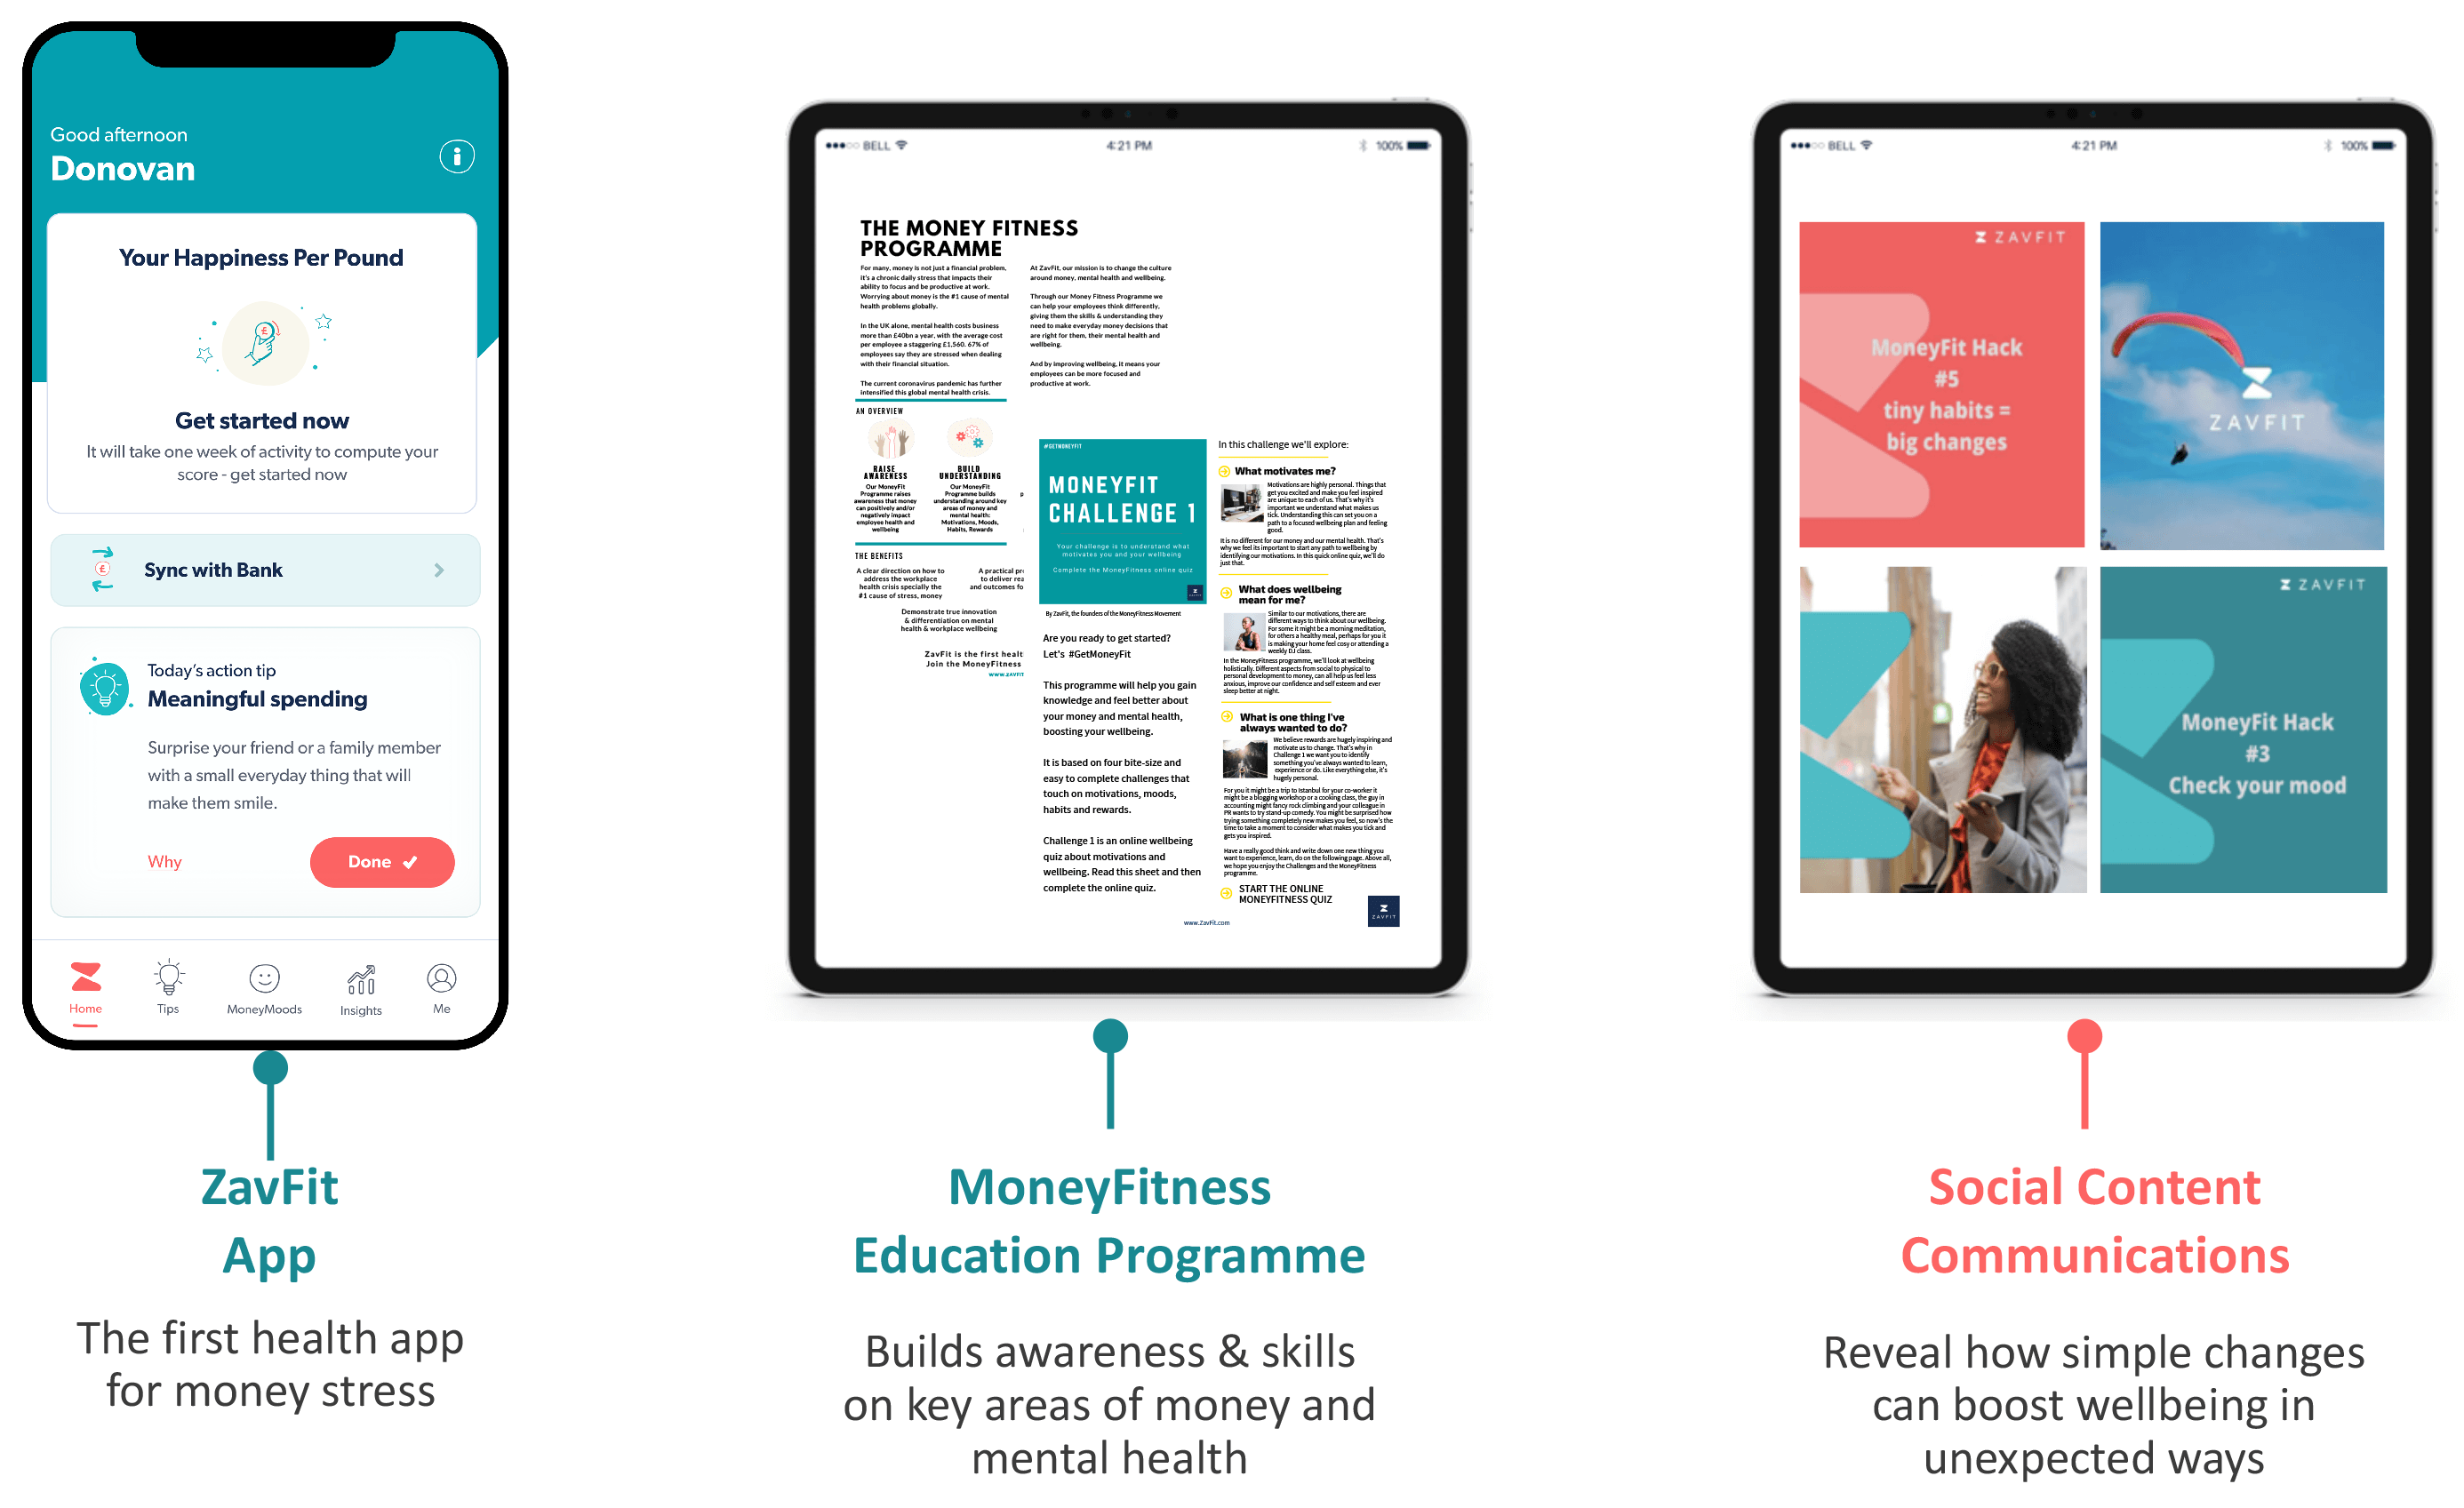 ZavFit App: The first health app for money stress. MoneyFitness Education Programme: Builds awareness & skills on key areas of money and mental health. Social Content Communications: Reveal how simple changes can boost wellbeing in unexpected ways.